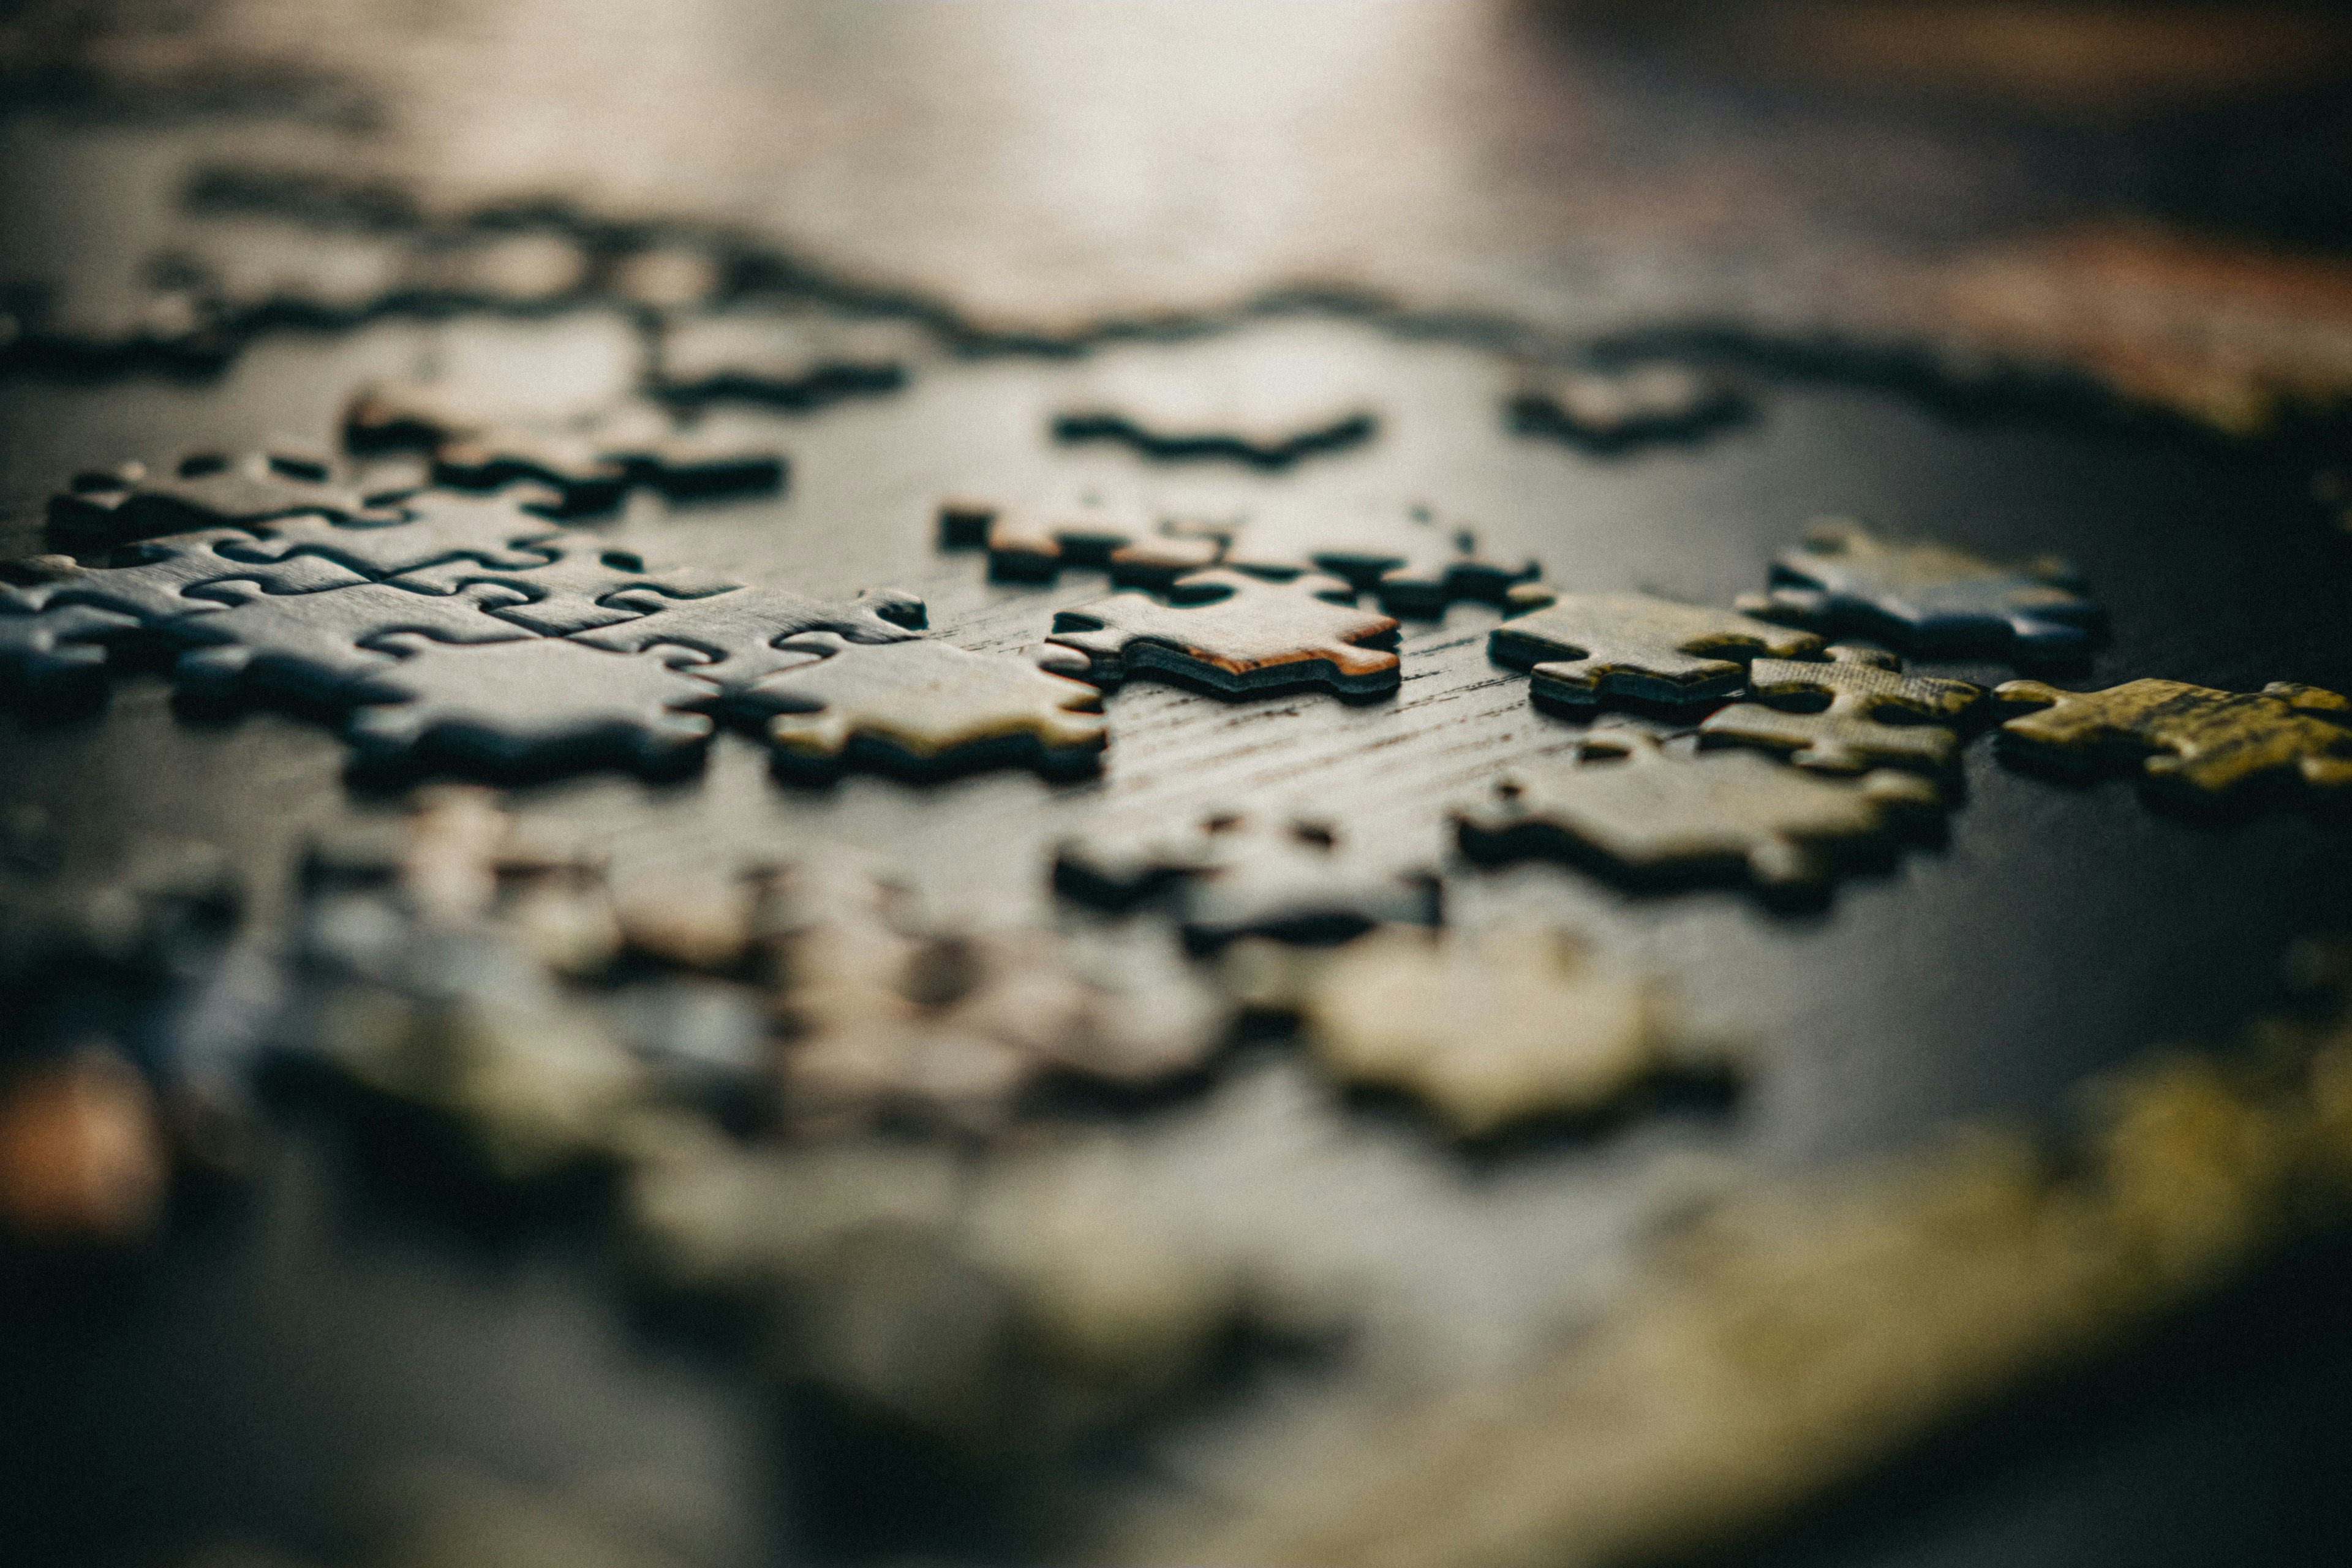 A close-up photo of mixed jigsaw puzzle pieces.